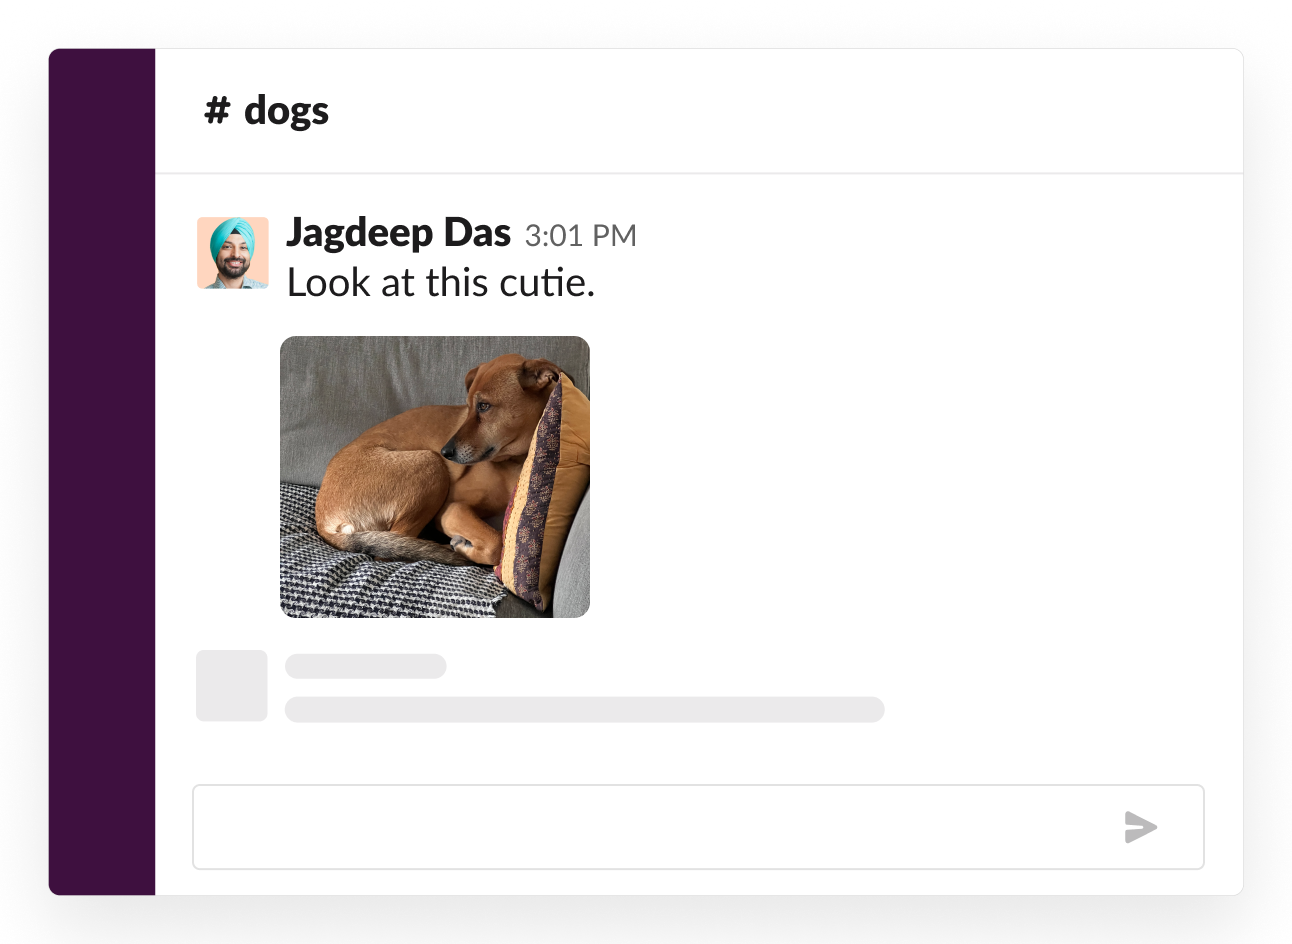 Example of a social channel about dogs where someone shared an adorable picture of their pup